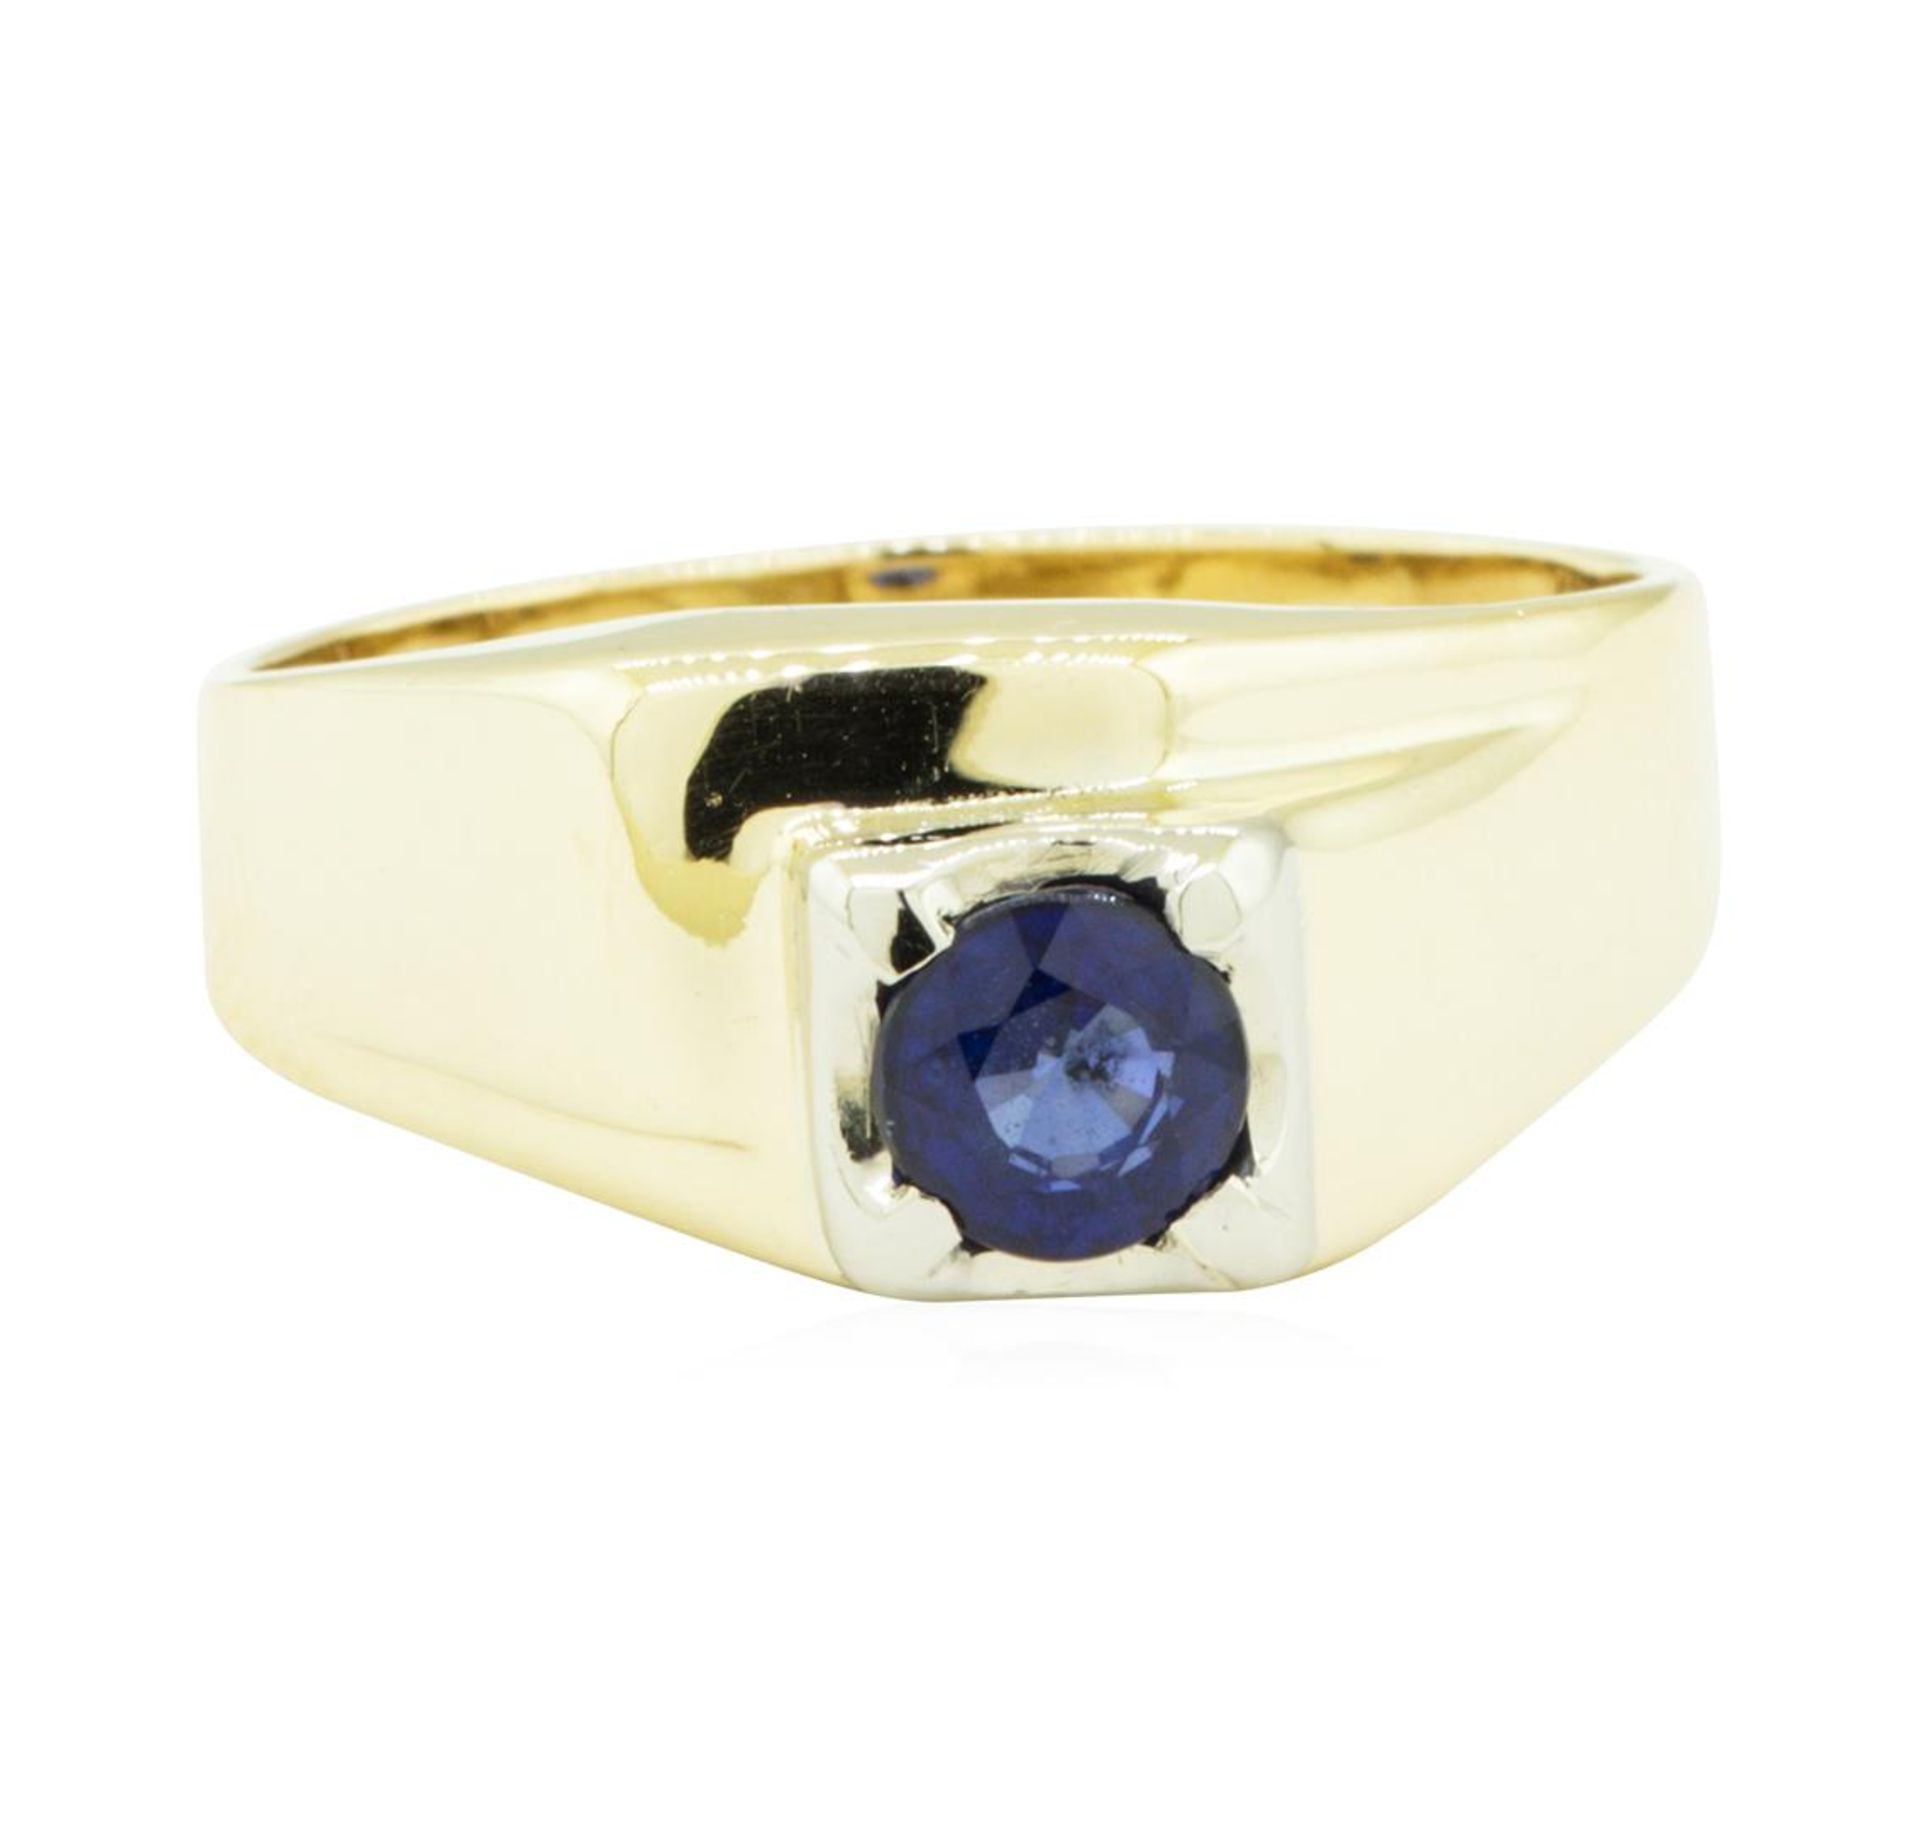 0.99 ctw Blue Sapphire Ring - 14KT Yellow Gold - Image 2 of 4